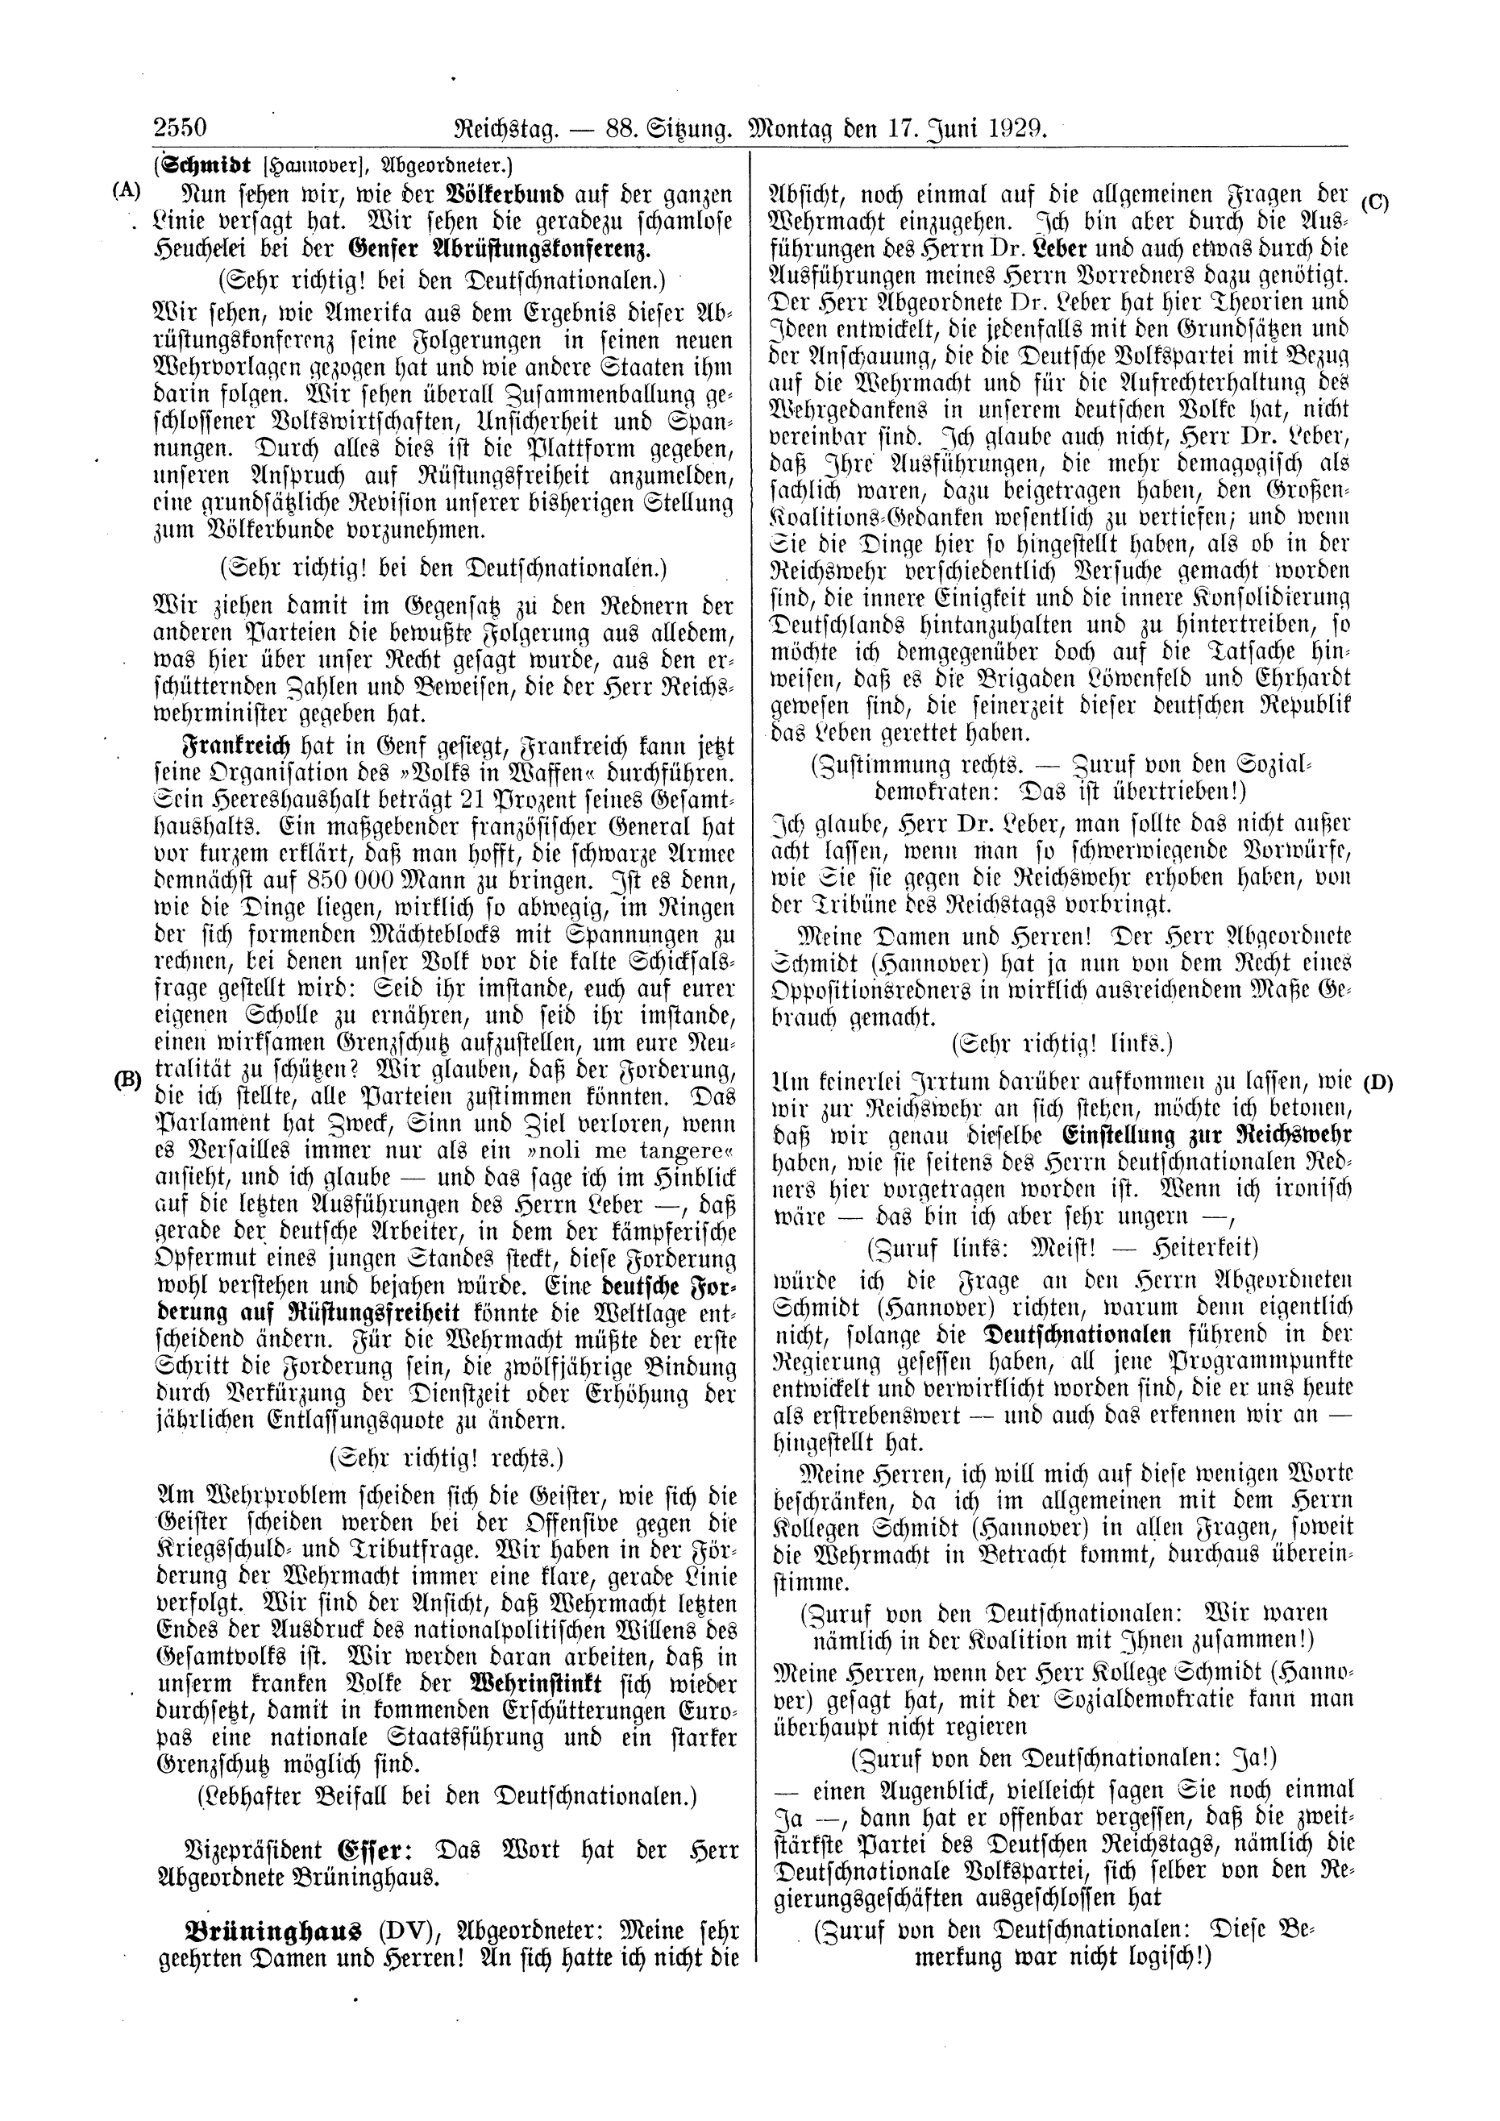 Scan of page 2550